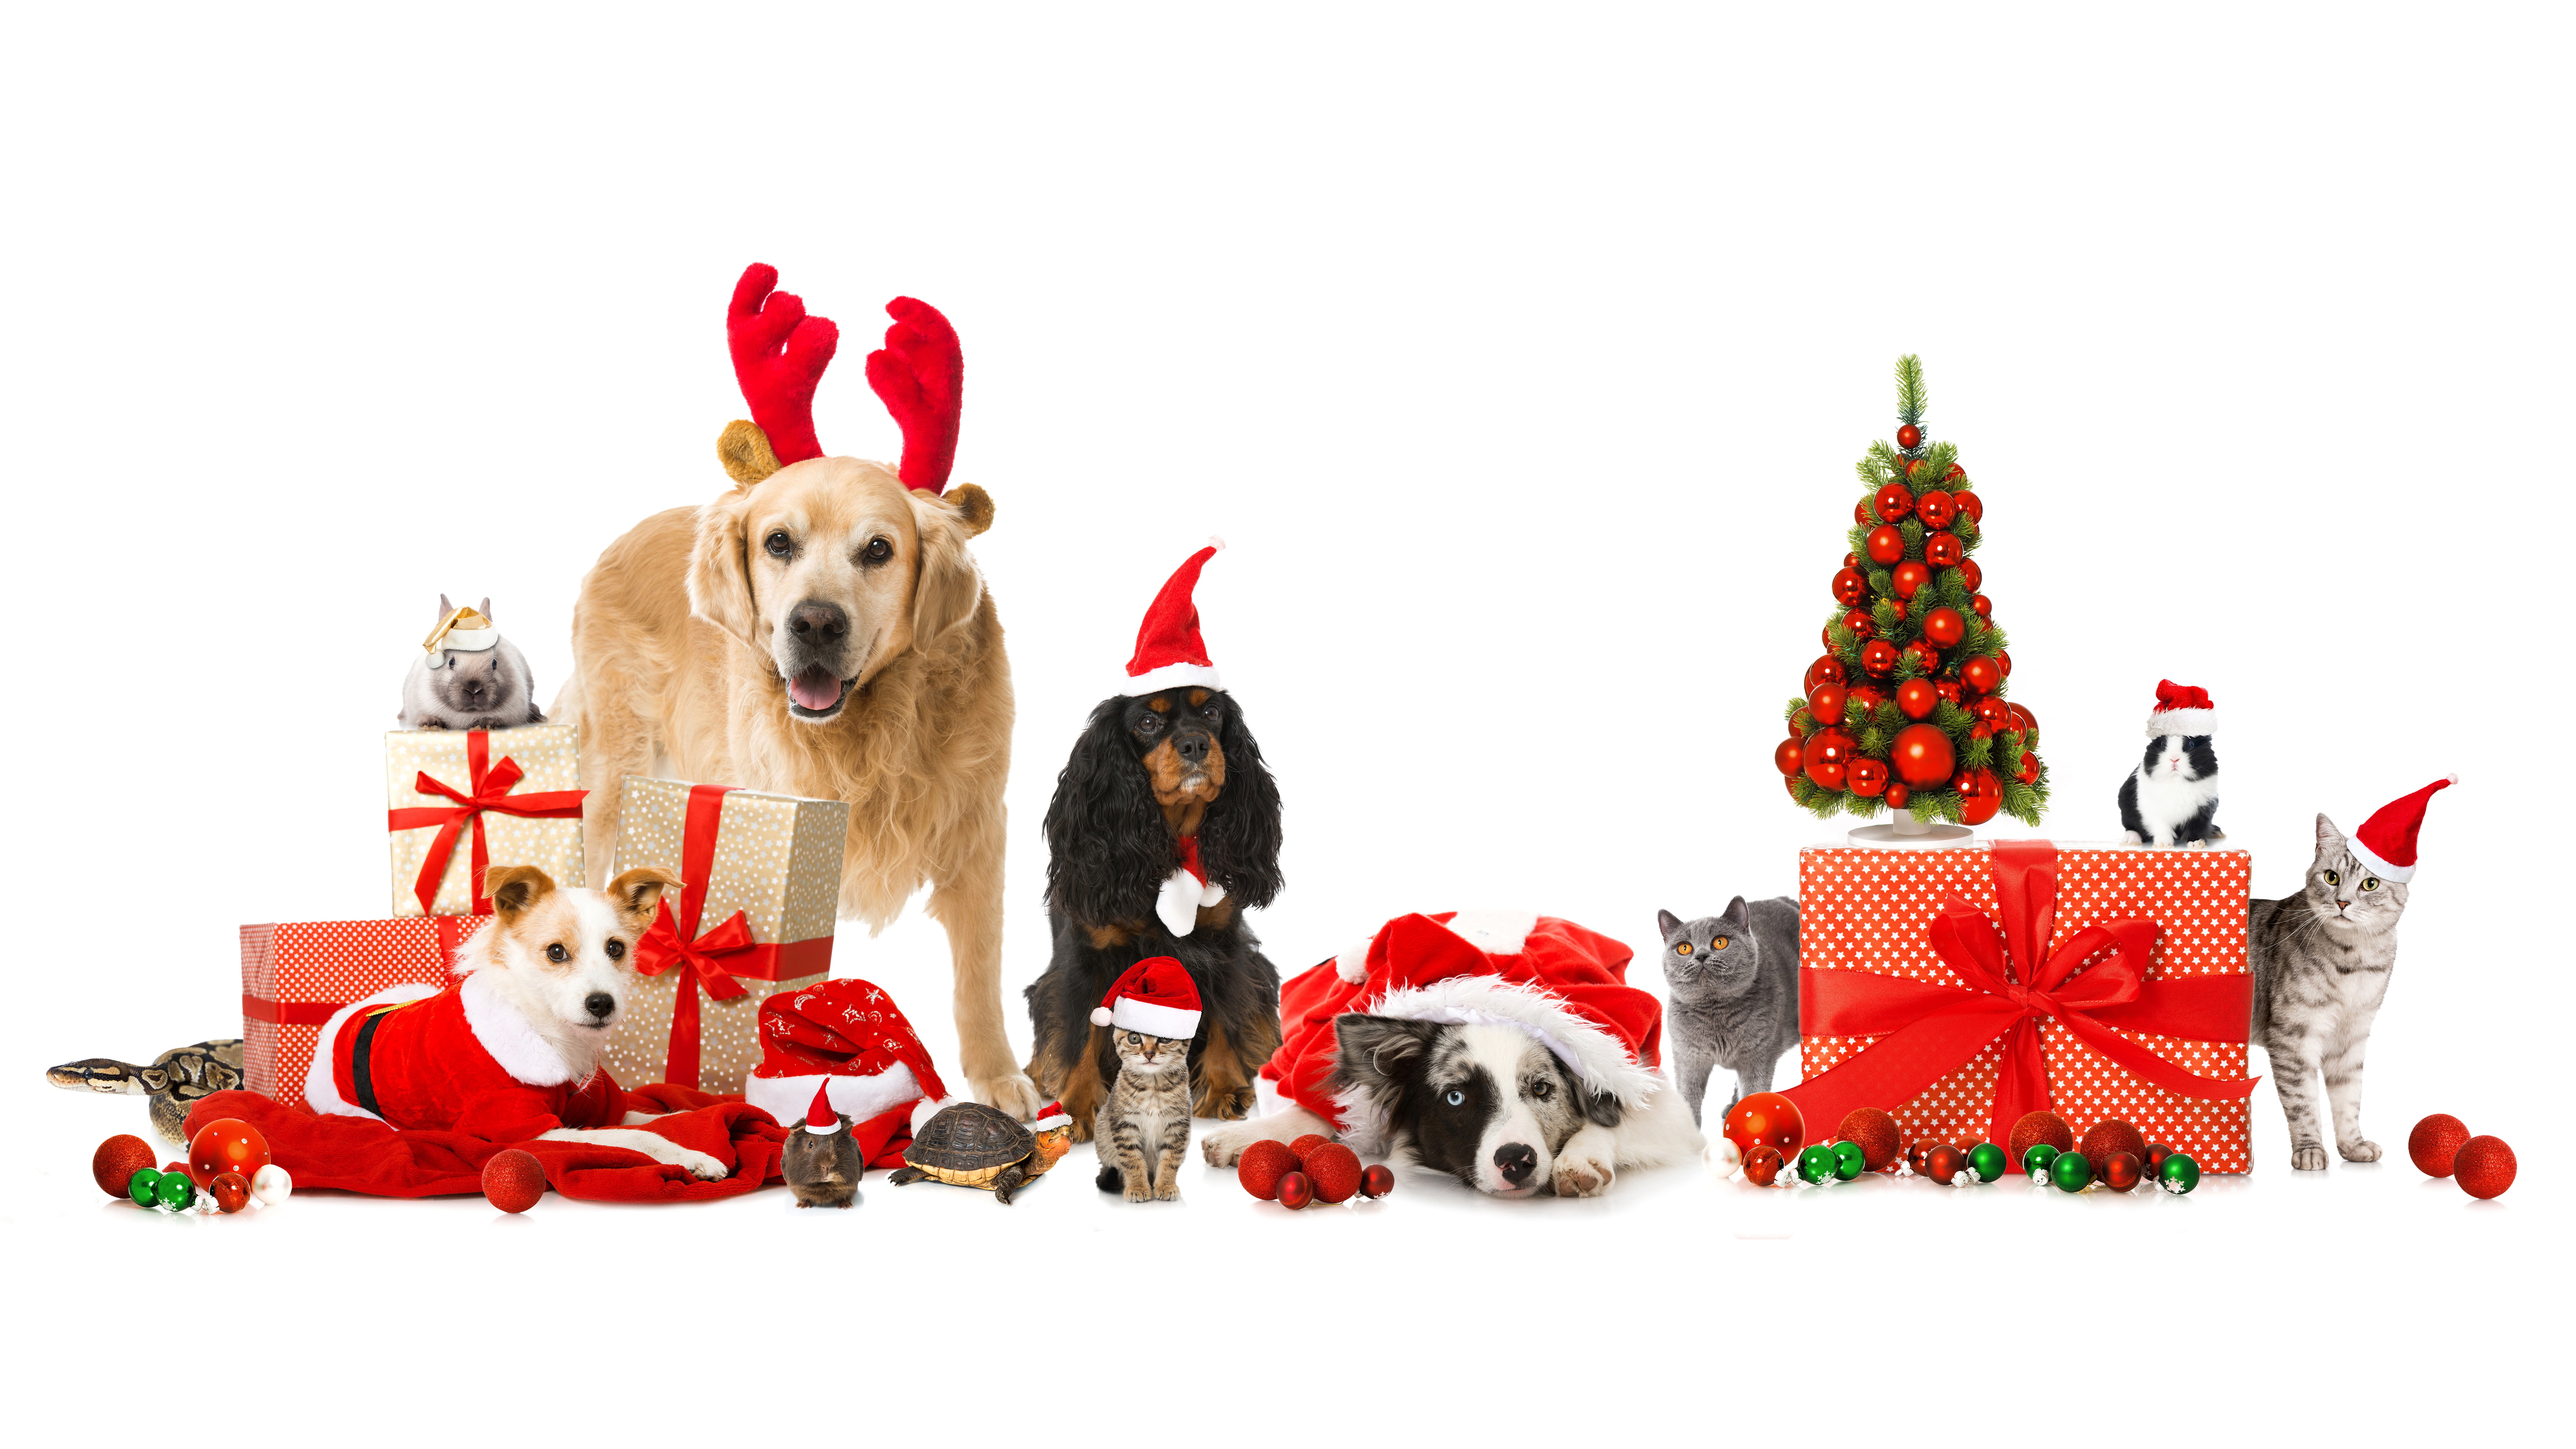 assorted Christmas gift boxes and assorted-color dogs and cats